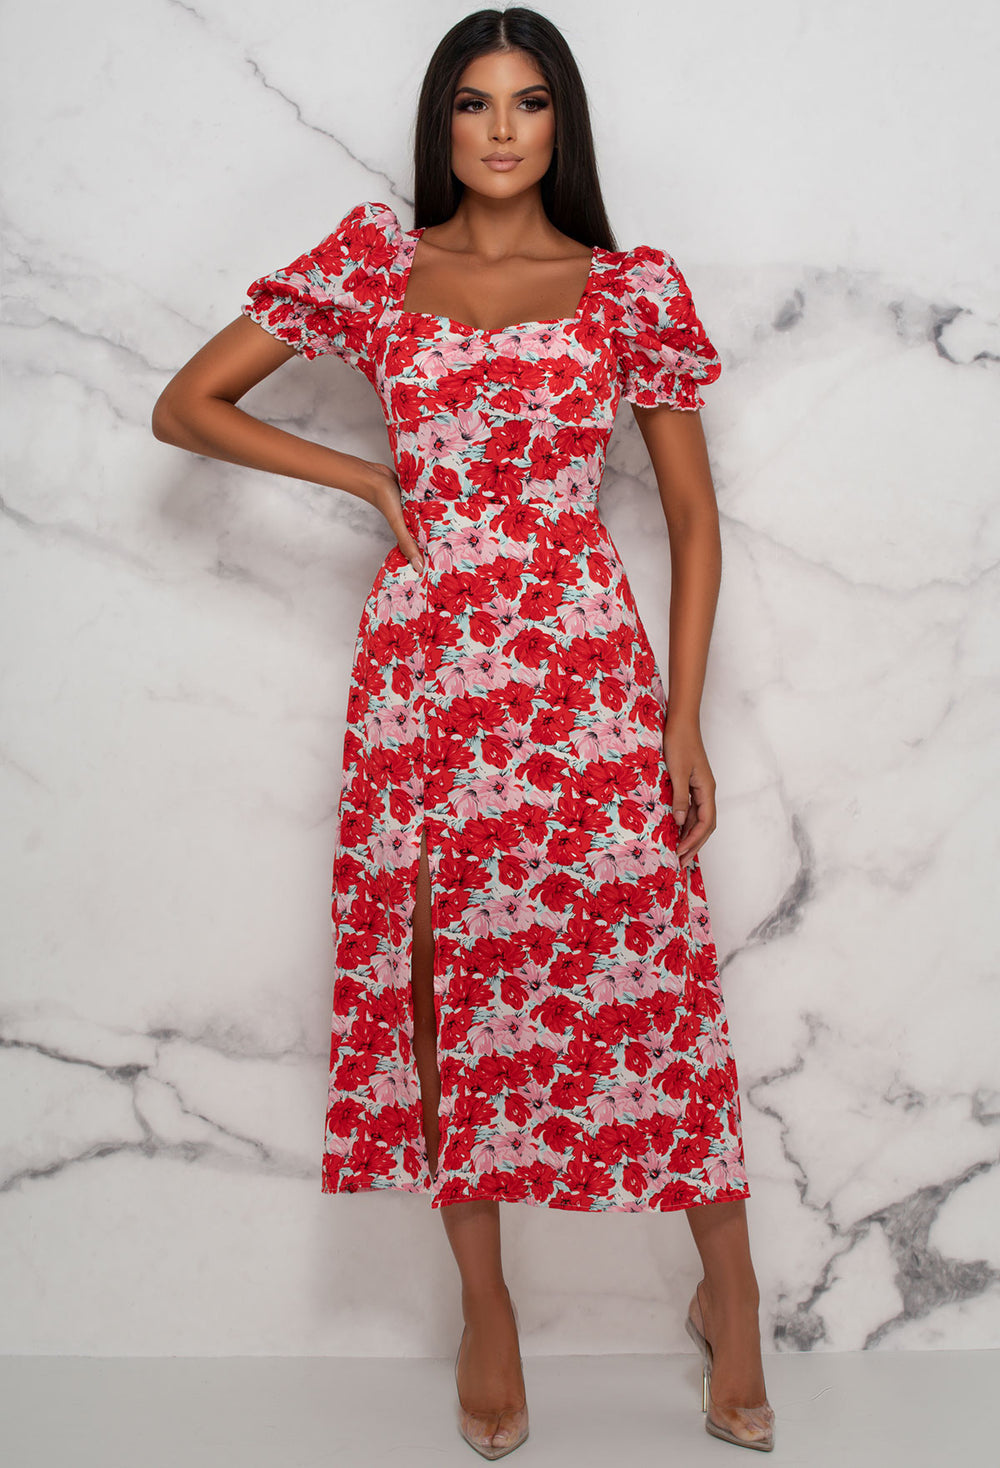 Summer Soiree Red Floral Midi Dress ...